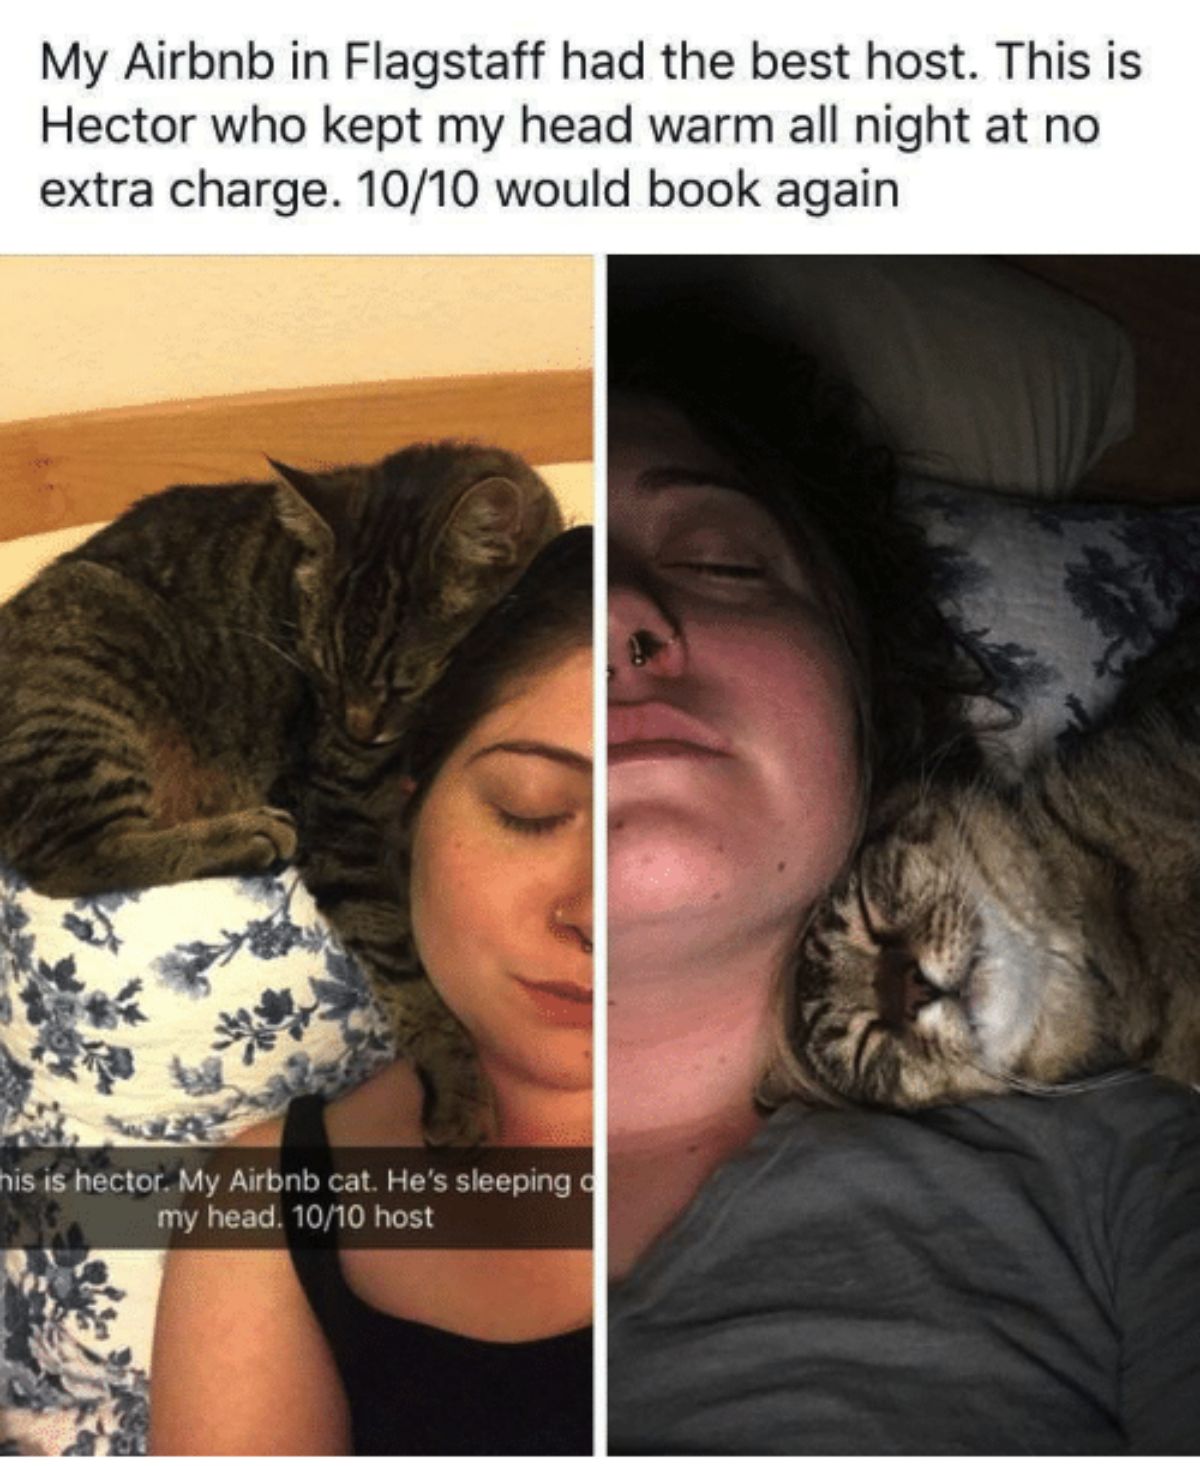 tabby cat sleeping in bed with woman